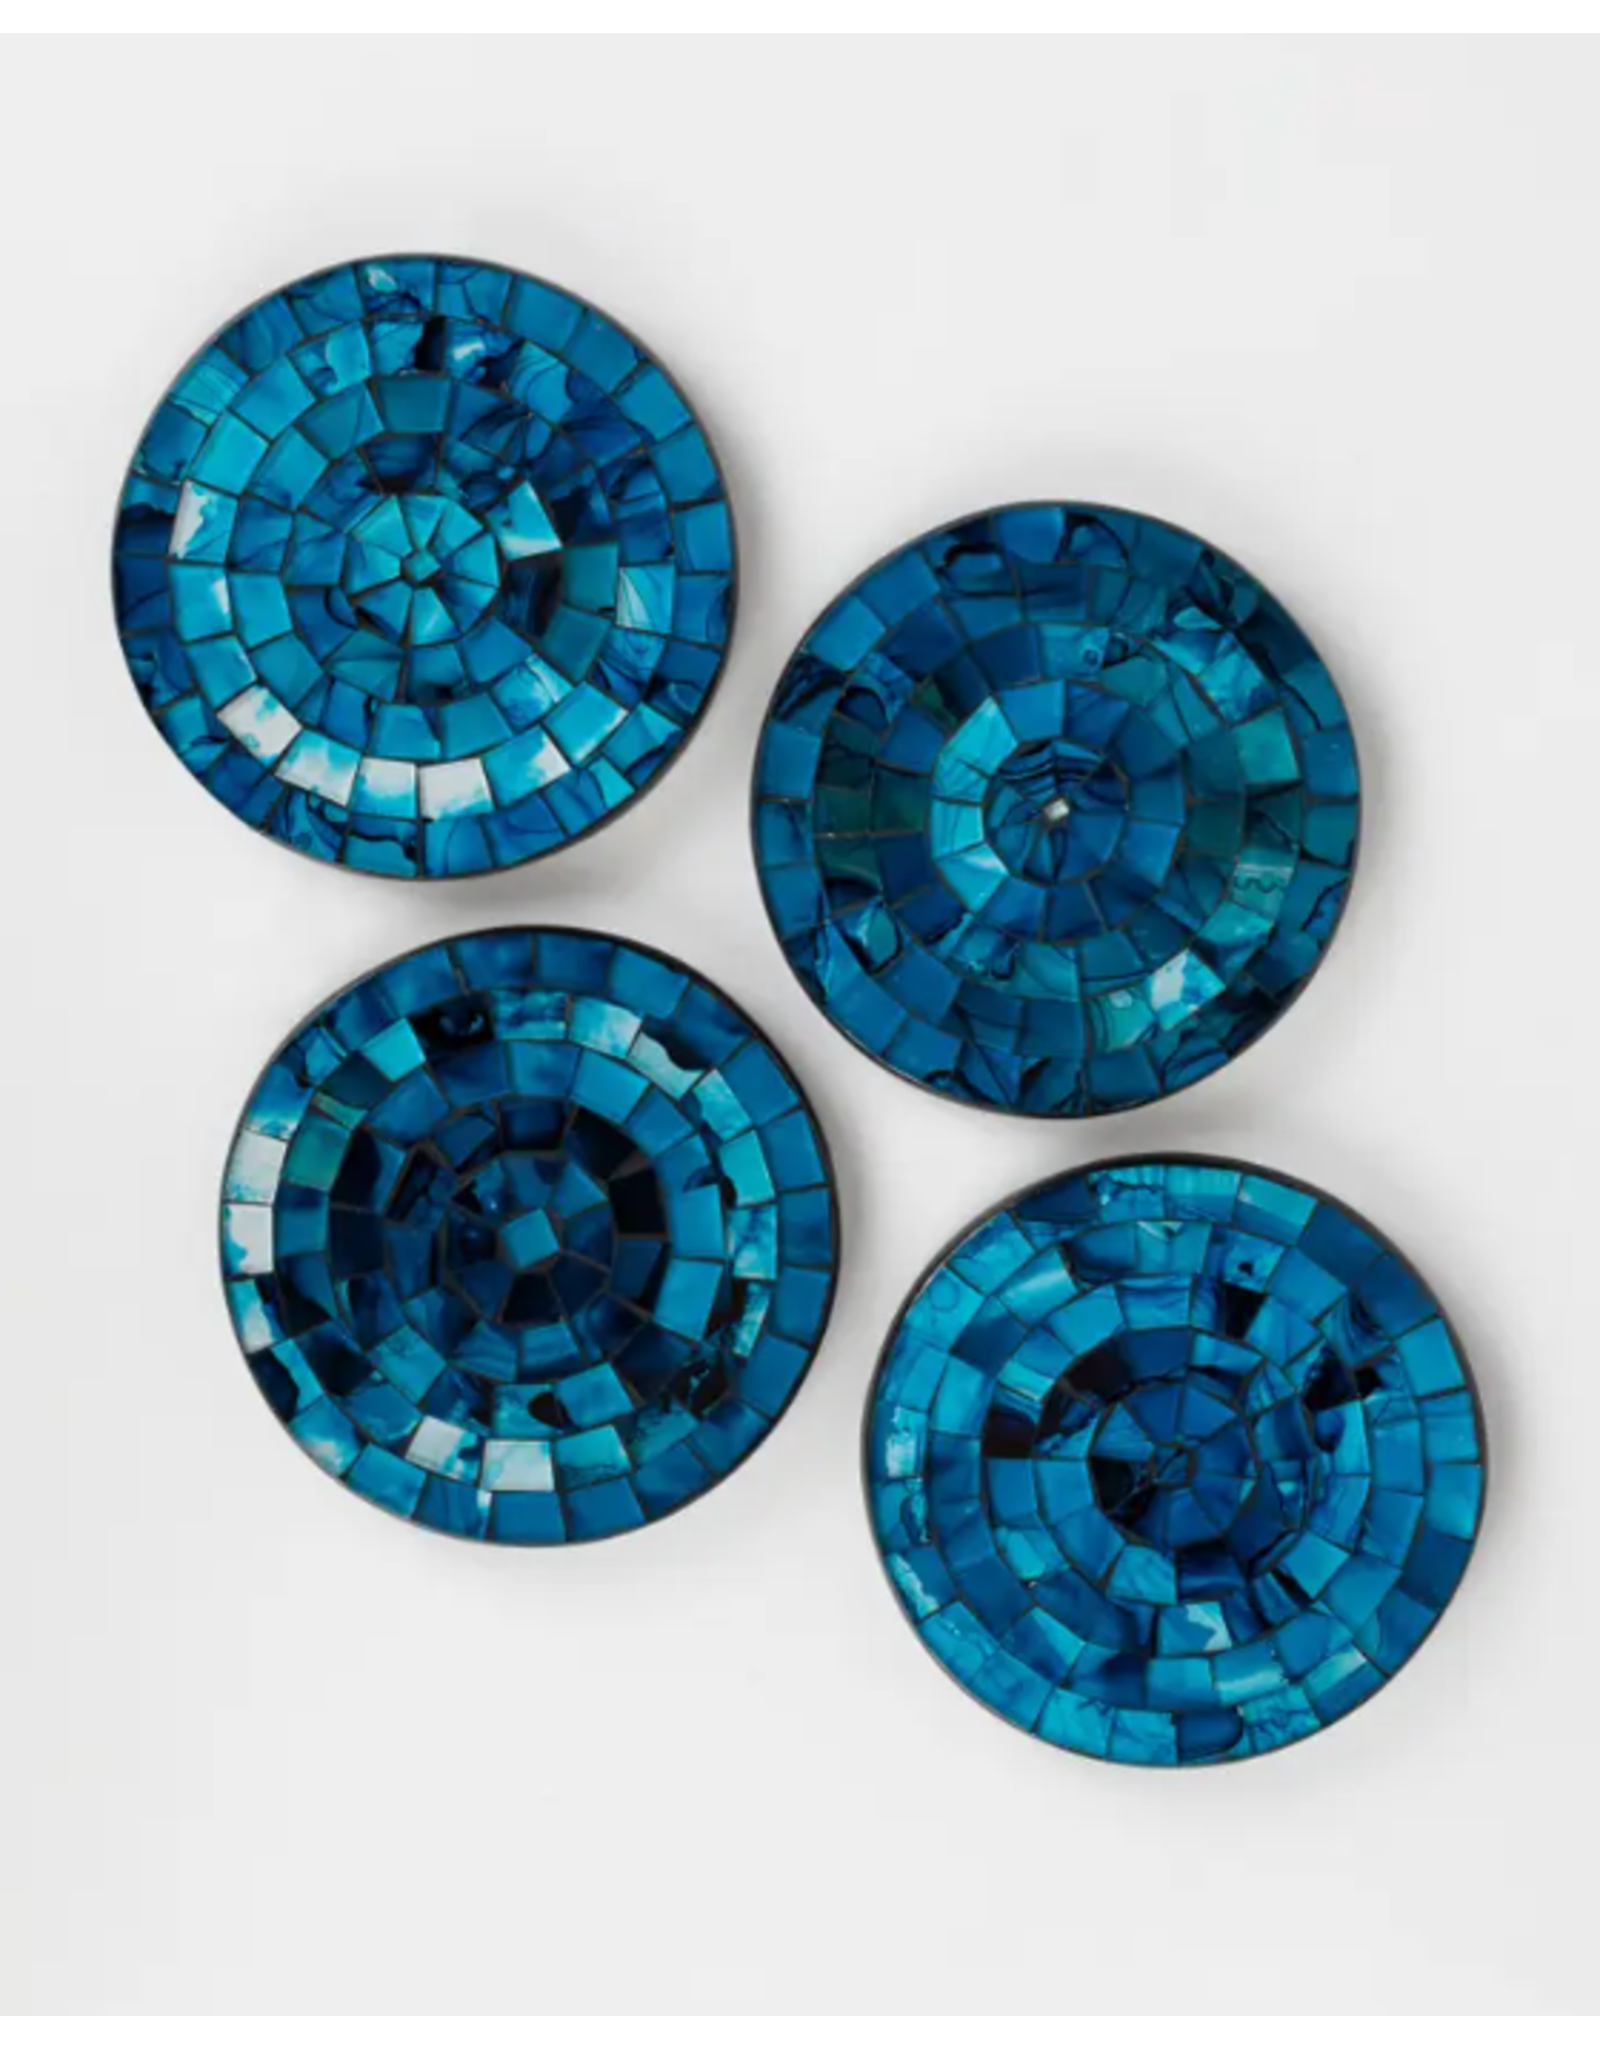 Indonesia Tropical Waters Mosaic Coasters (set of 4), Indonesia